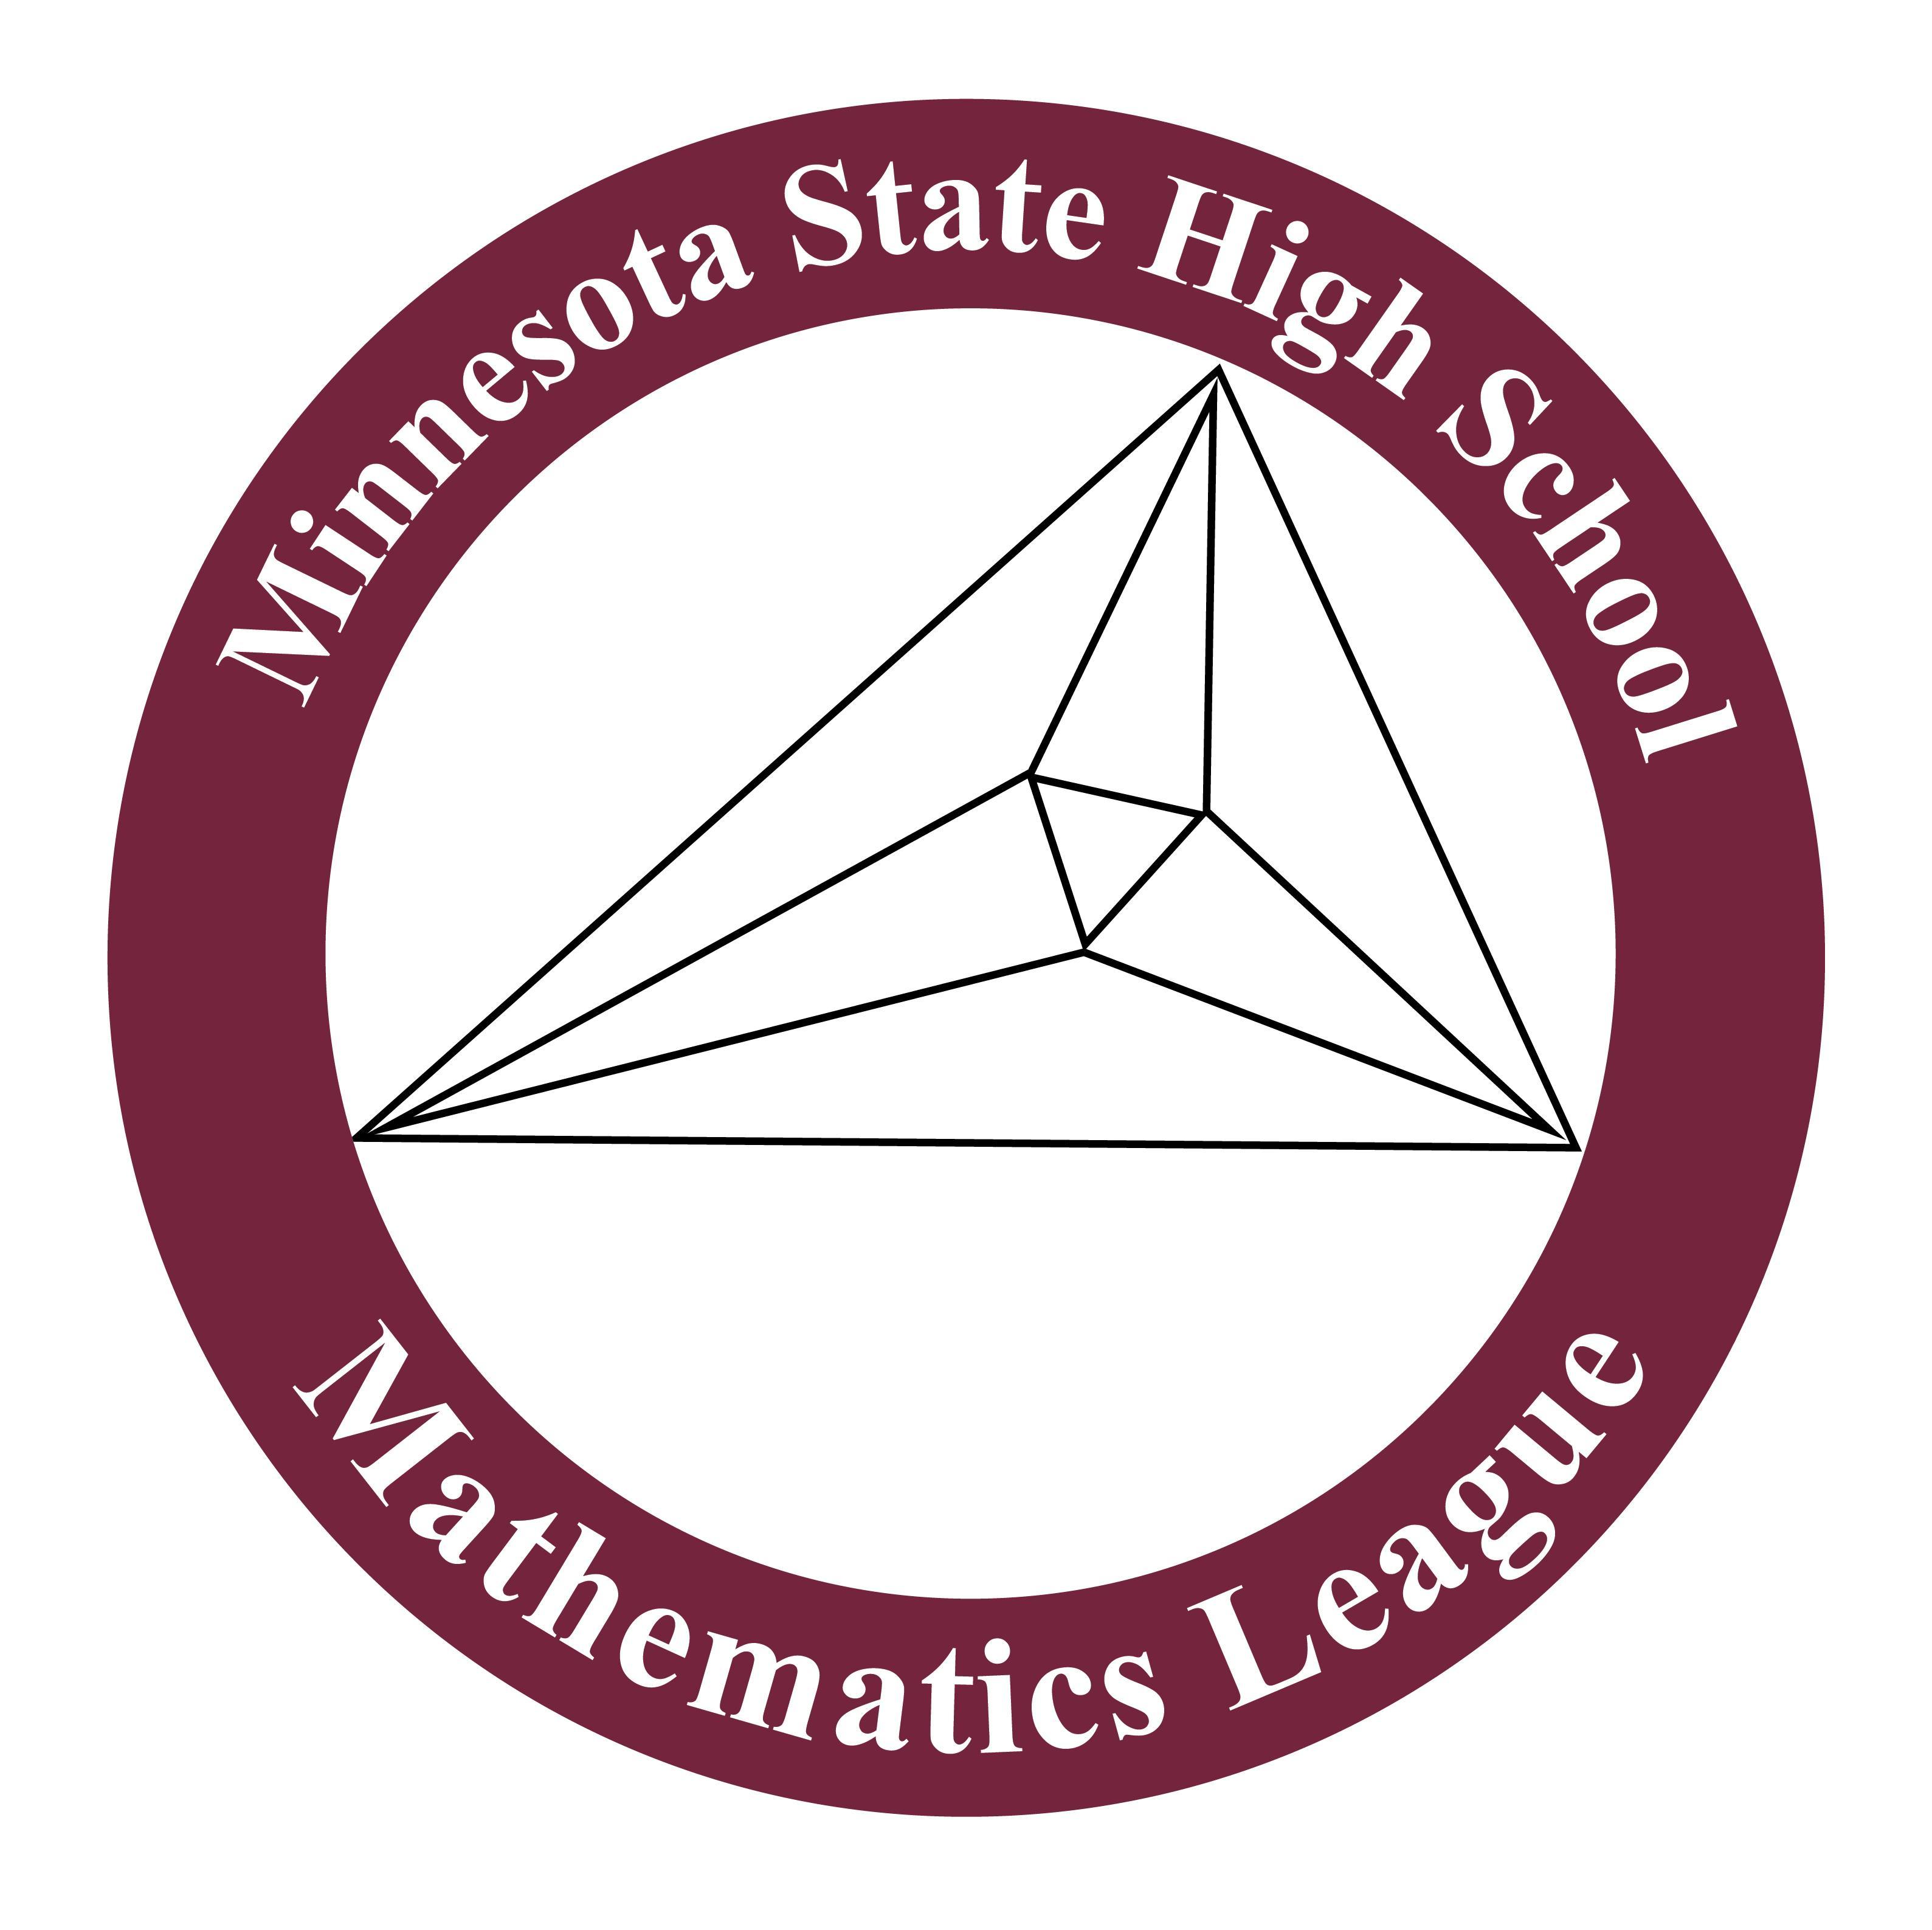 Official account of the Minnesota State High School Mathematics League